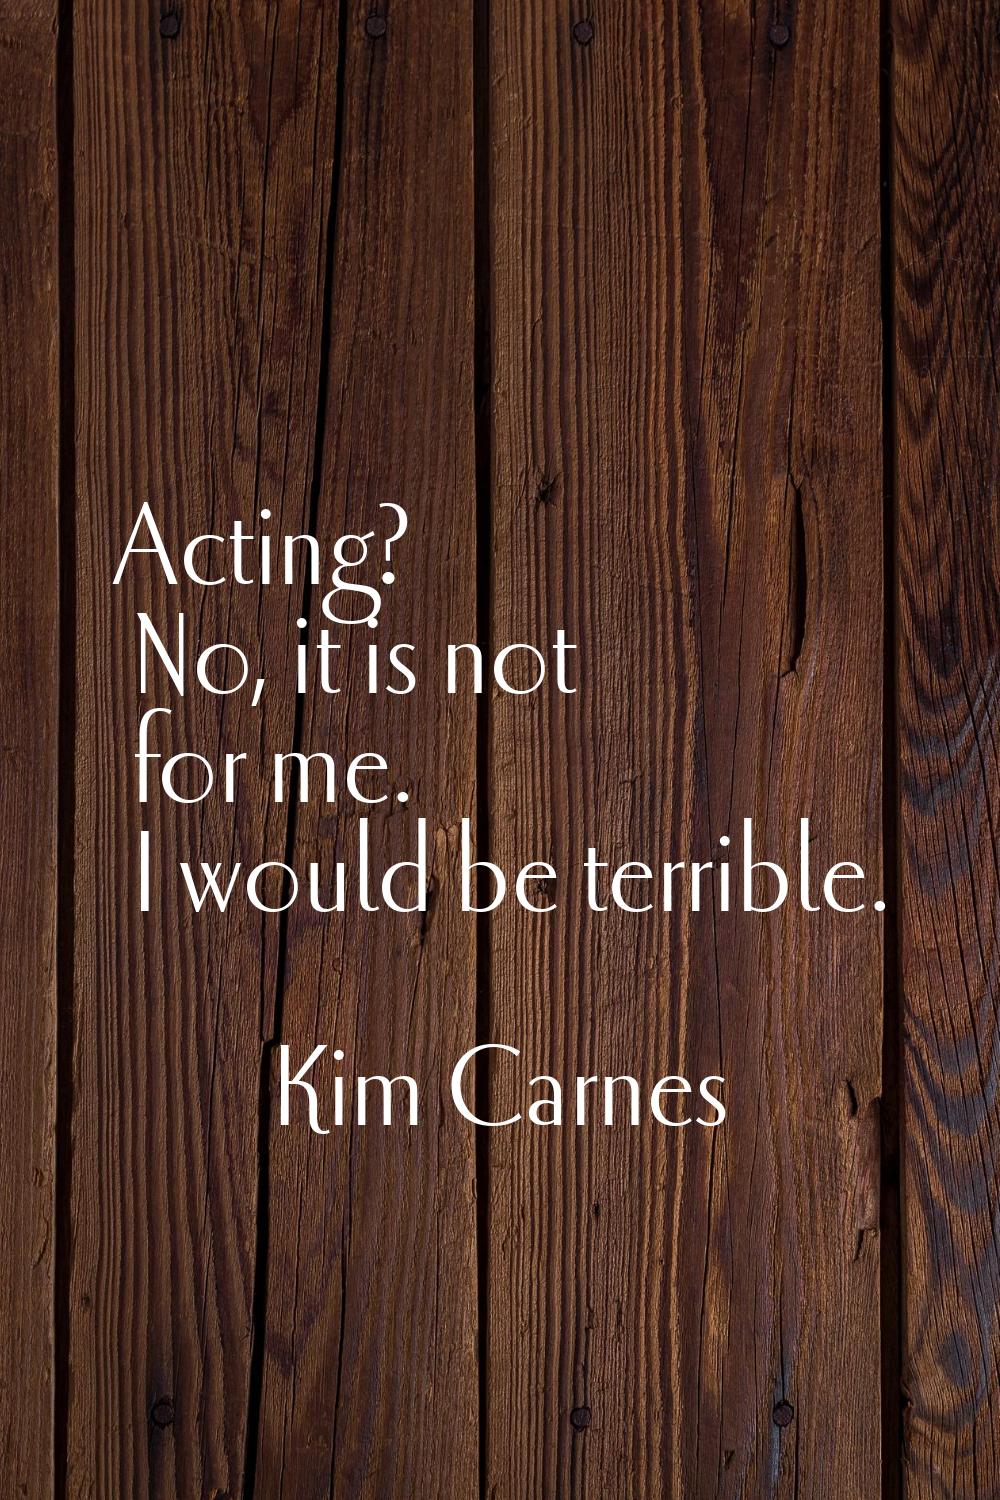 Acting? No, it is not for me. I would be terrible.